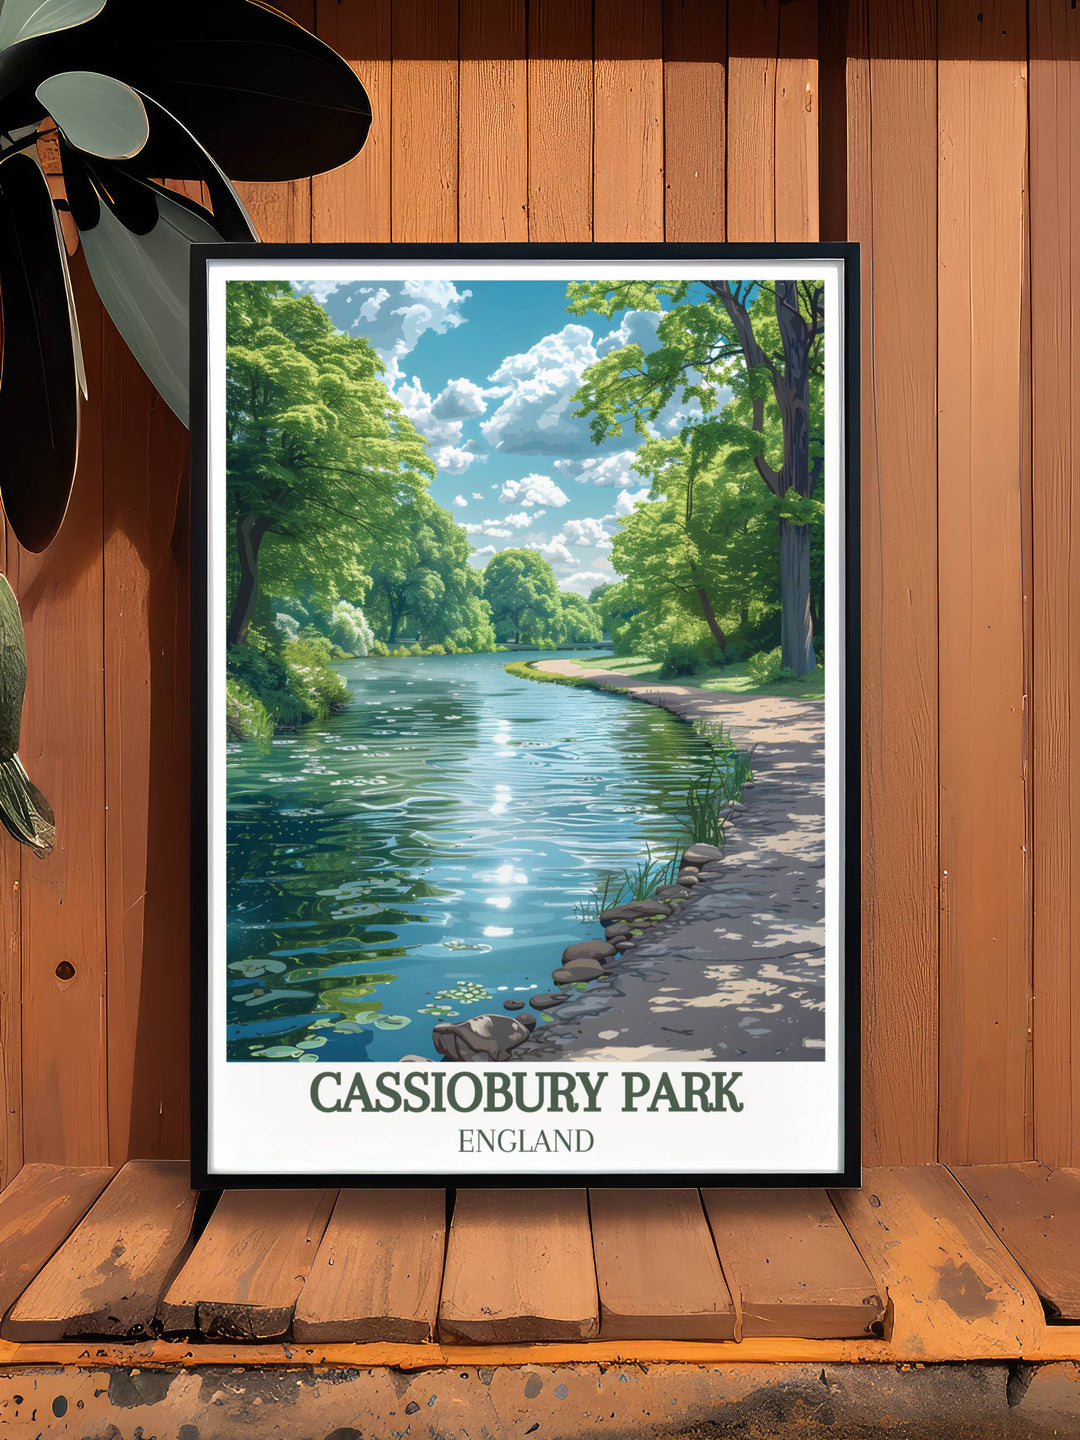 Summer at Cassiobury Park Canal, with lush greenery and tranquil water flow, captured in a high quality framed print